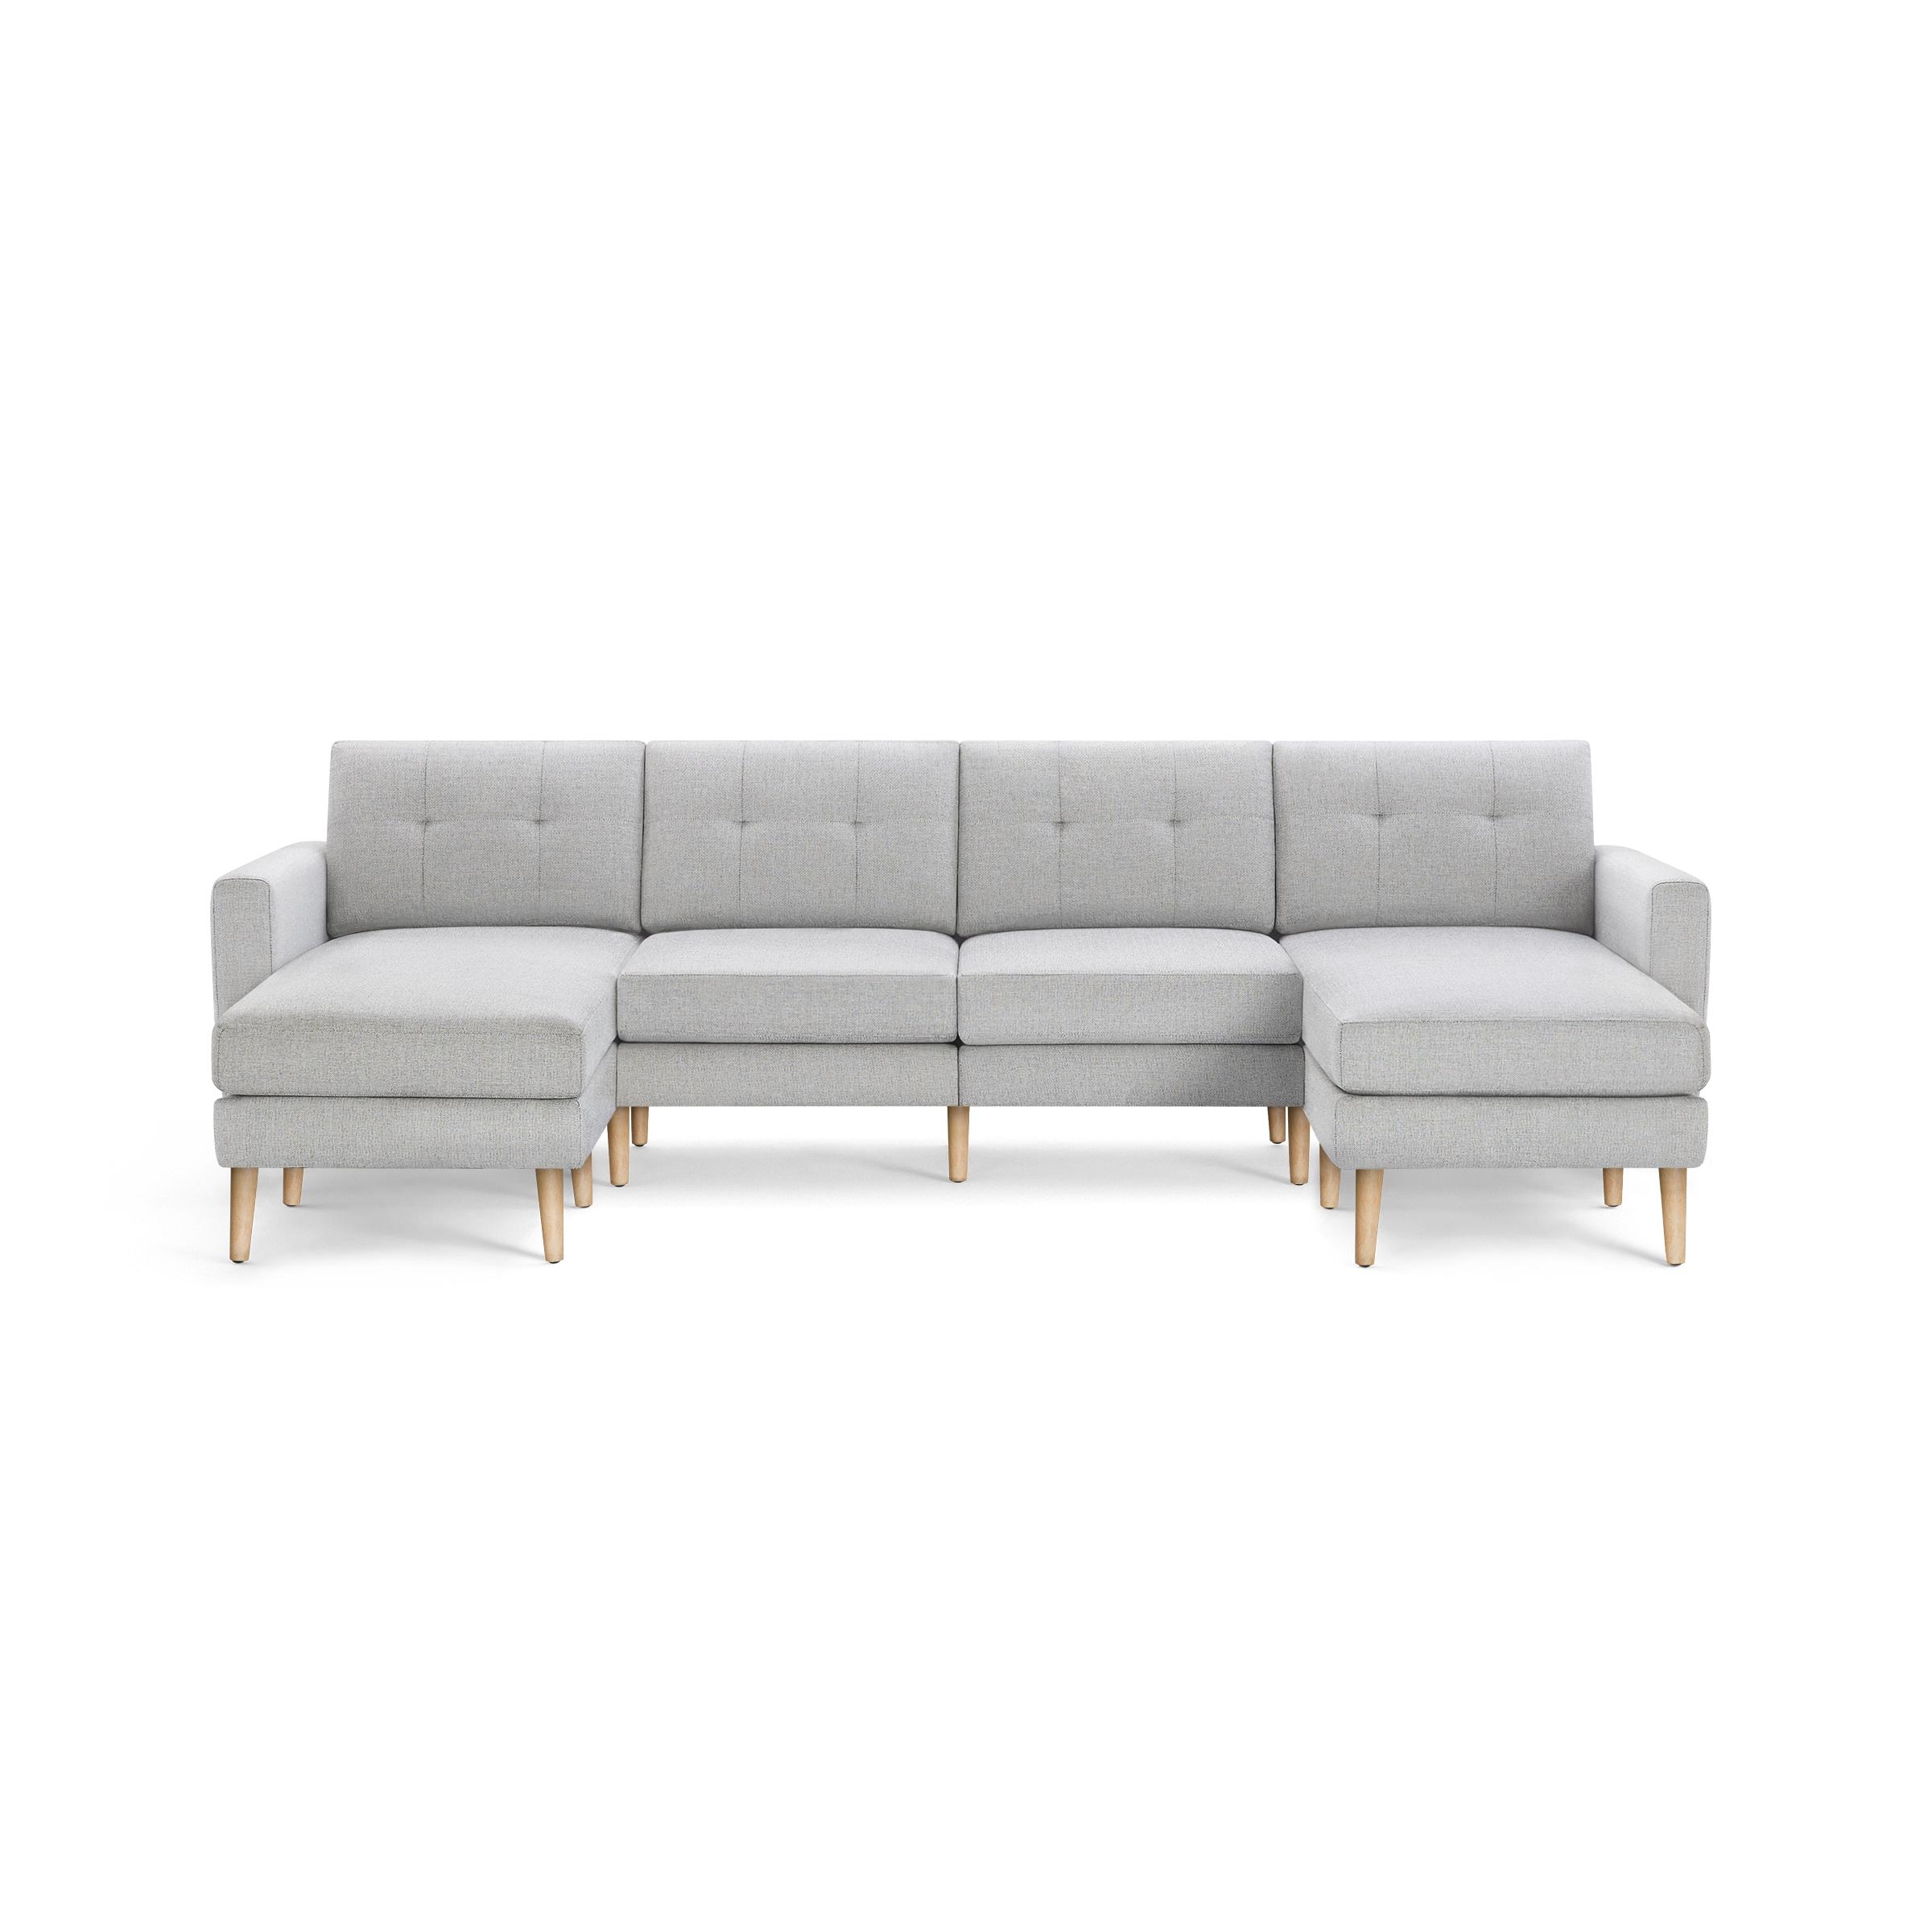 Nomad Double Chaise Sectional in Crushed Gravel, Leg Finish: OakLegs - Image 0